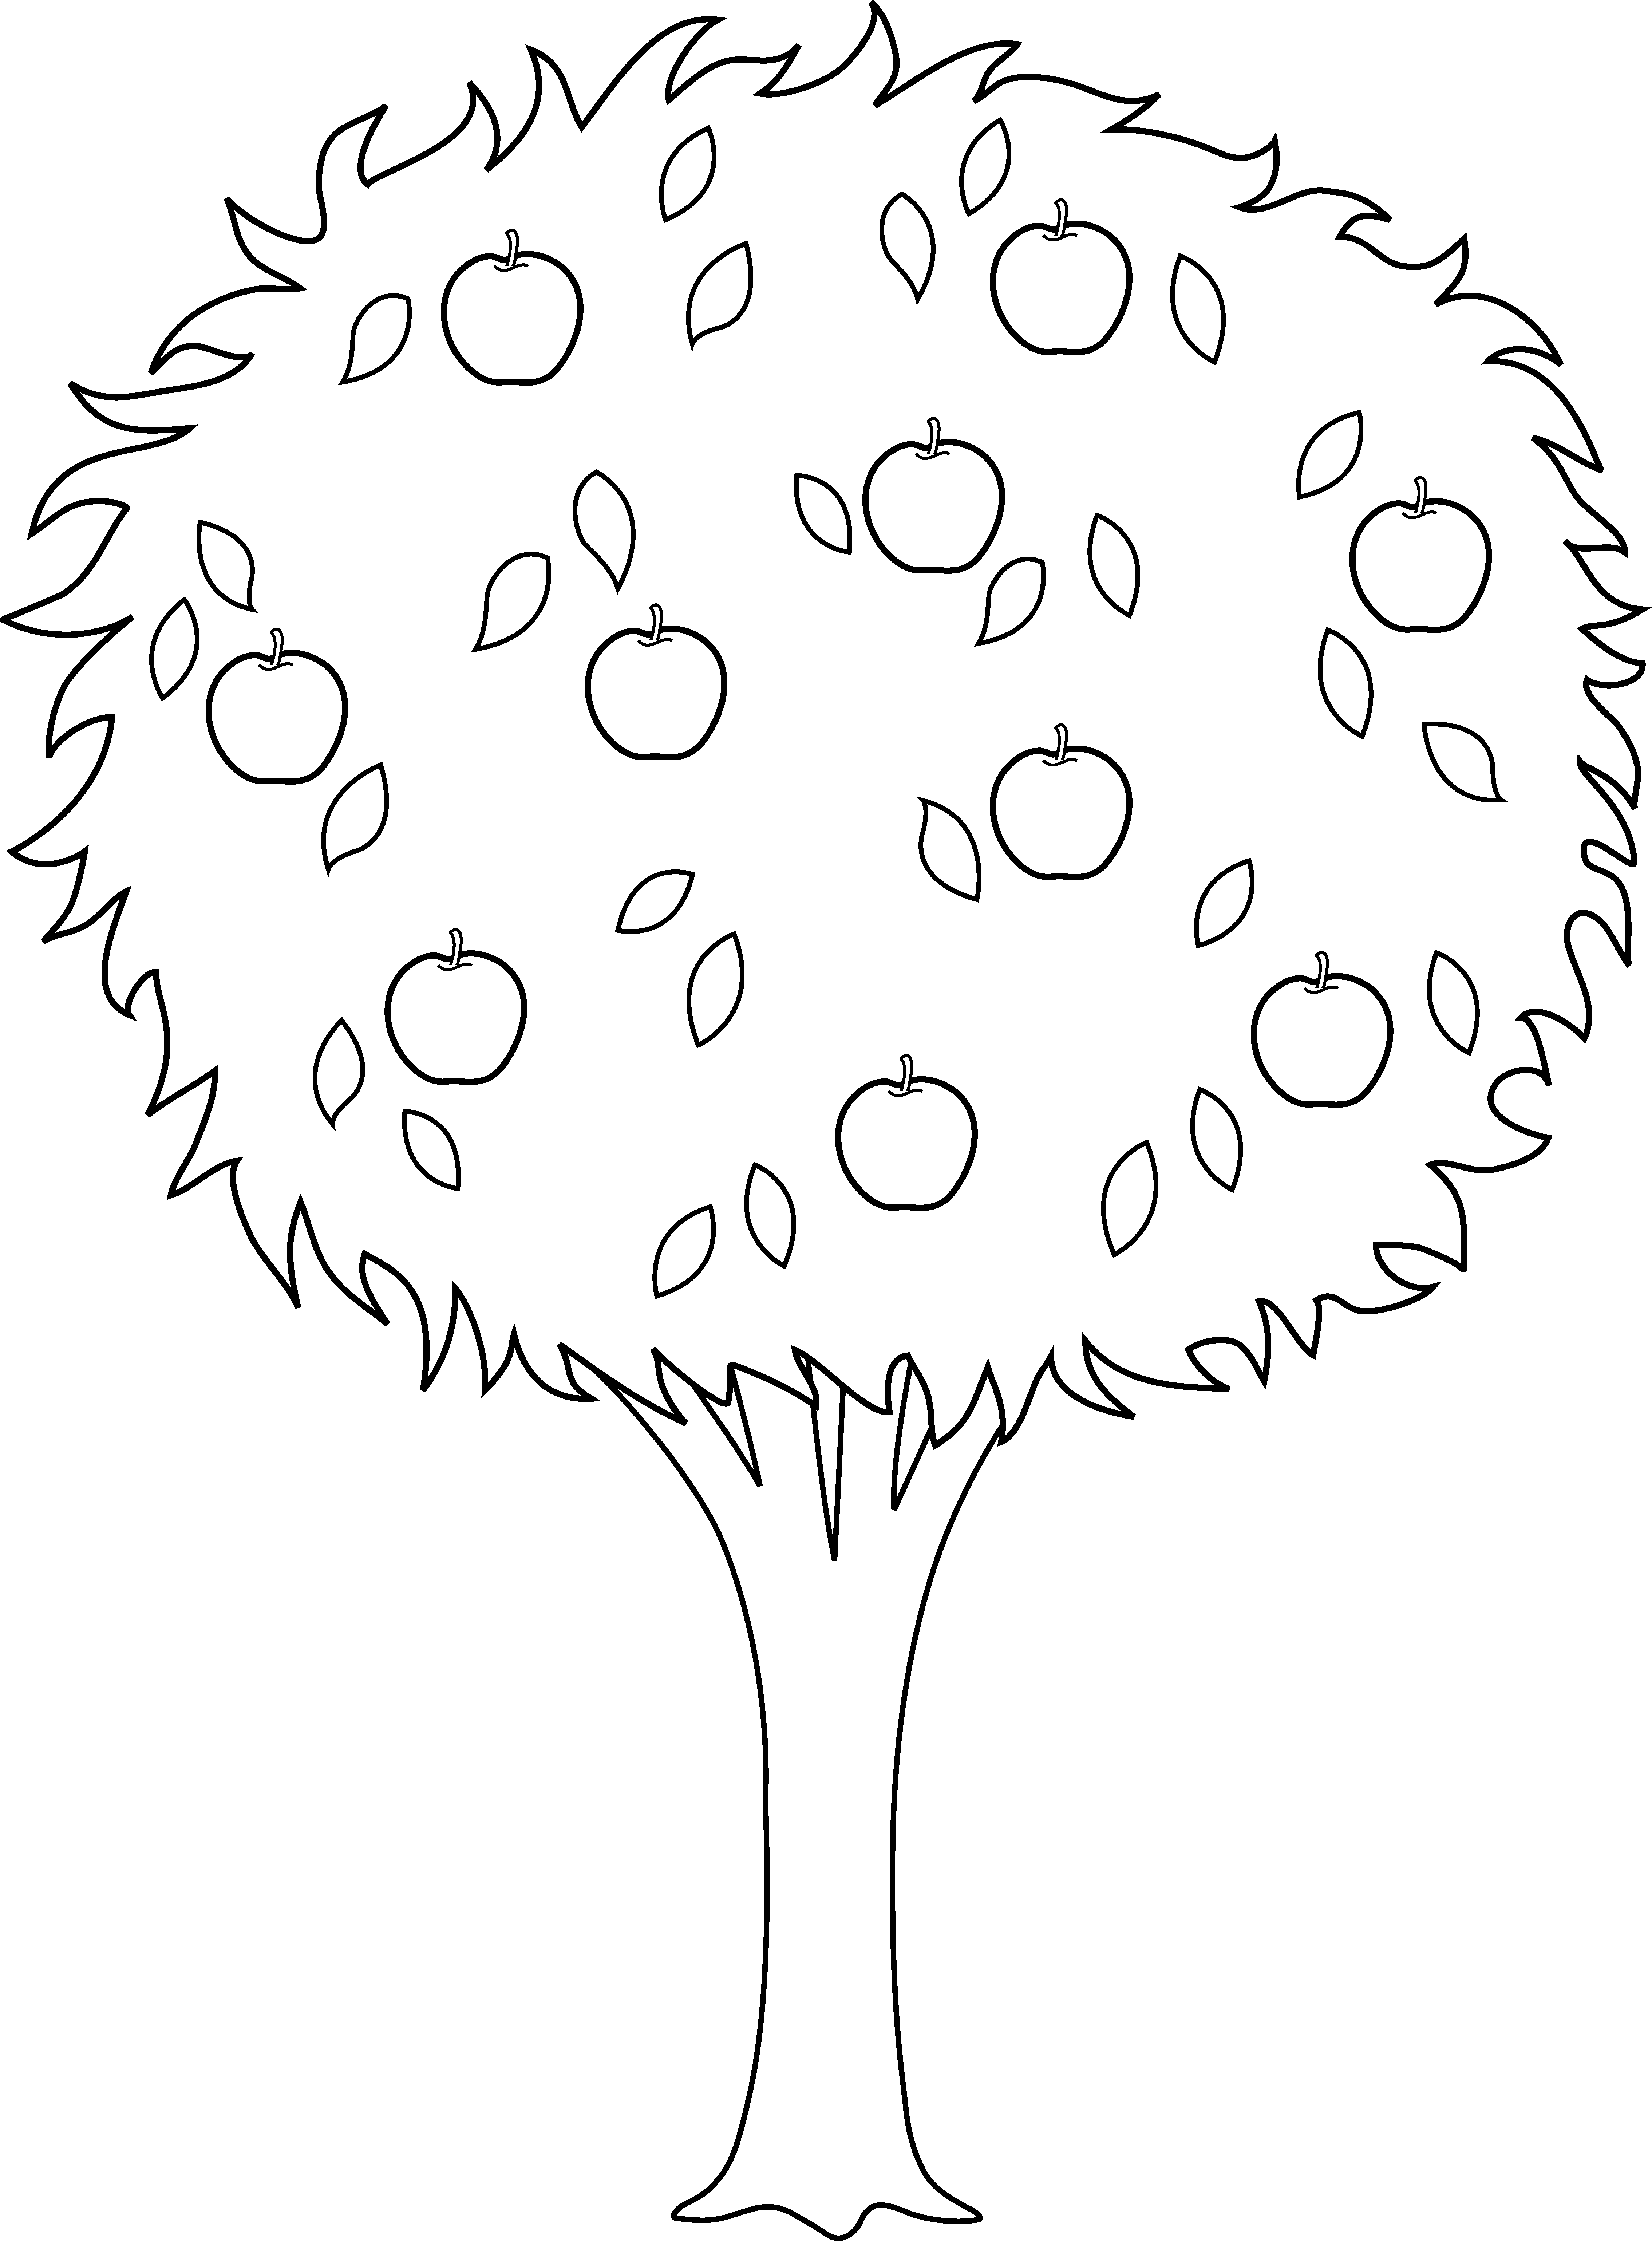 Colorable Apple Tree Outline - Free Clip Art